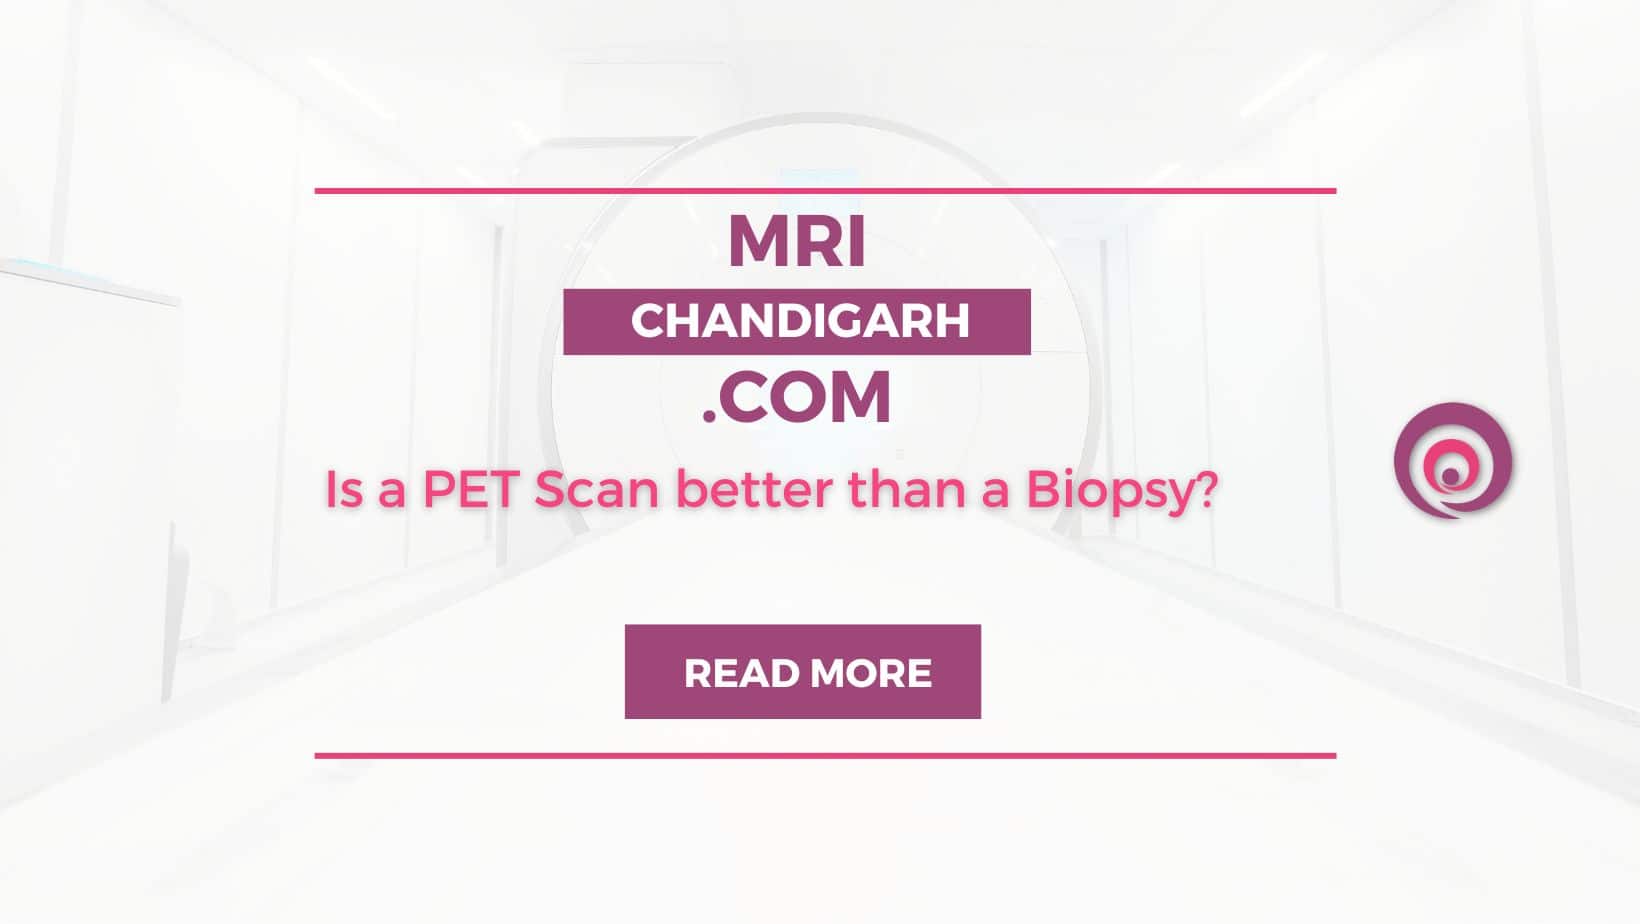 Is a PET Scan better than a Biopsy?